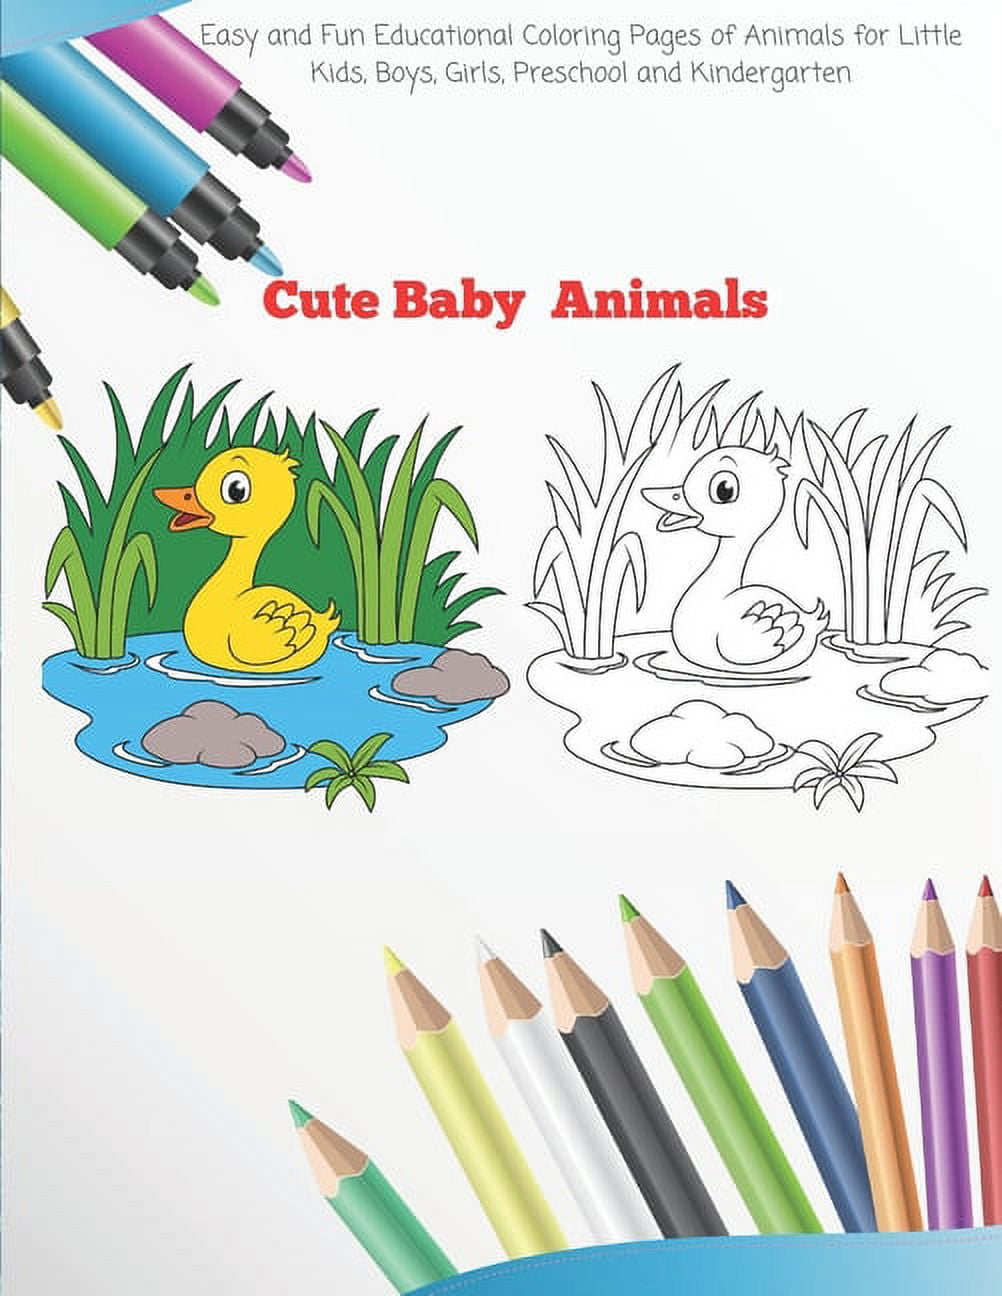 Cute Animal Coloring Book for Kids: Fun and Easy Coloring Pages with Dog,  Rabbit, Panda, Sheep, and Many More for Boys, Girls, Kids Ages 7-12:   Imagination with Fun and Easy Coloring